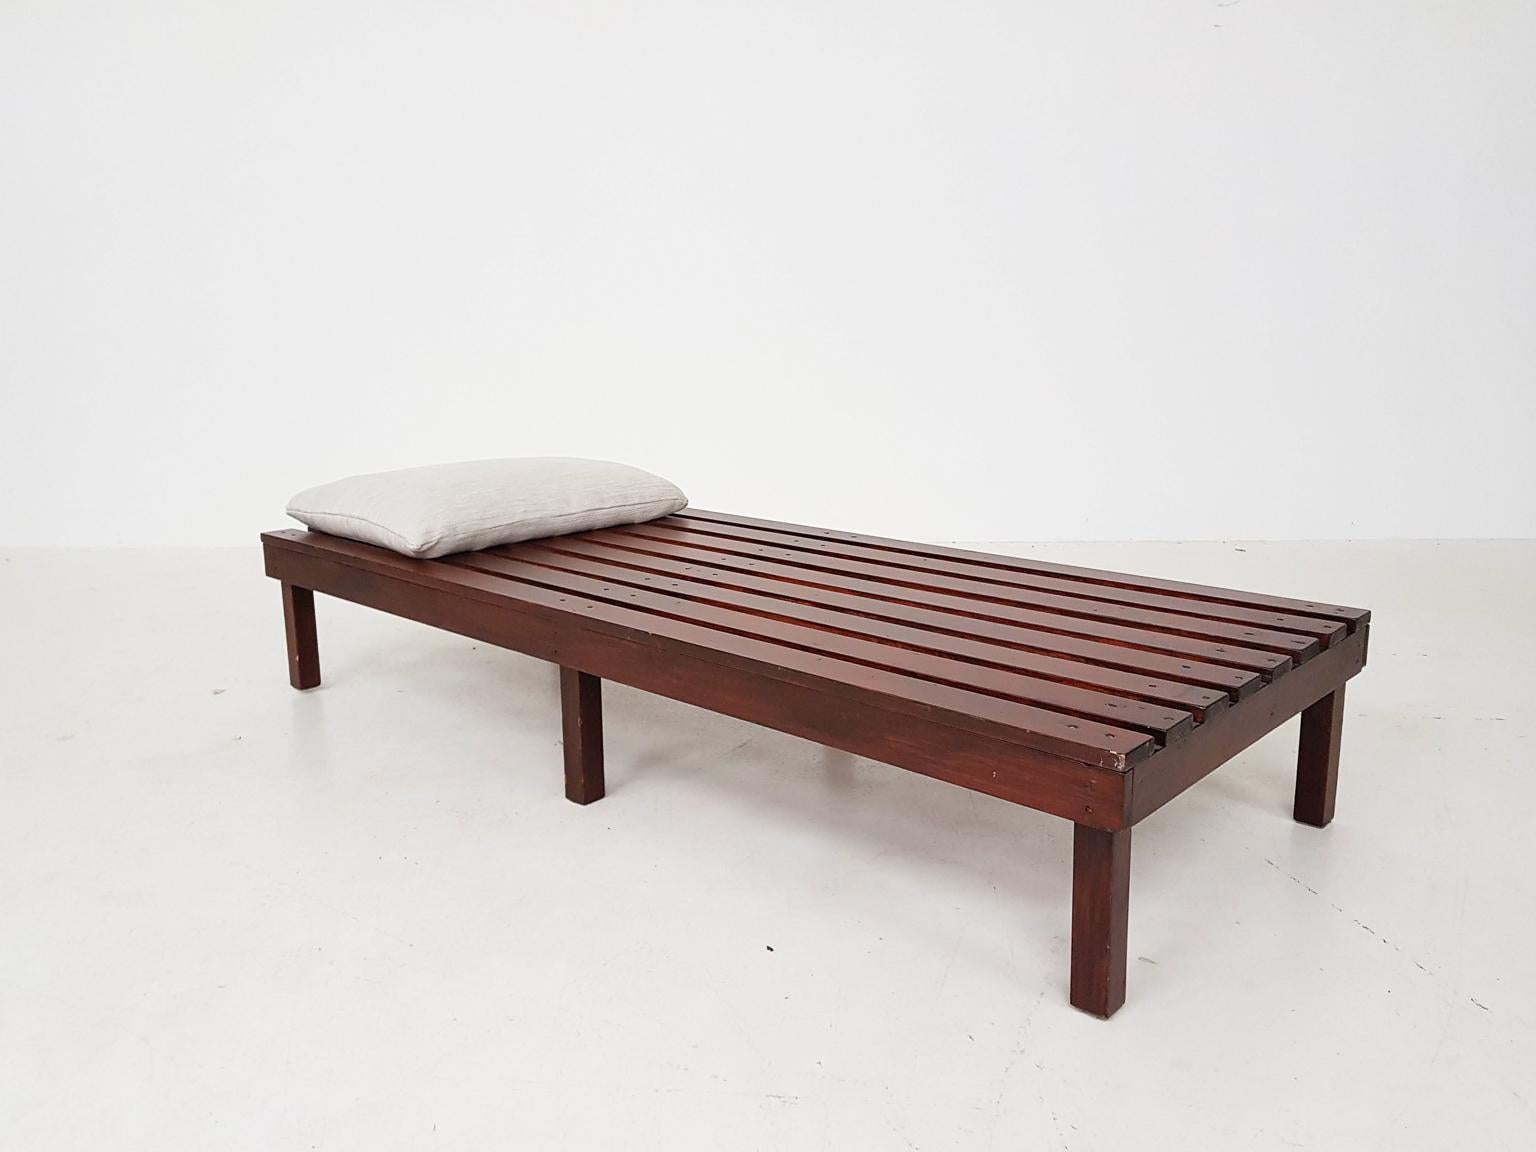 20th Century Martin Visser or Charlotte Perriand Style Slat Bench or Daybed, Dutch, 1950s